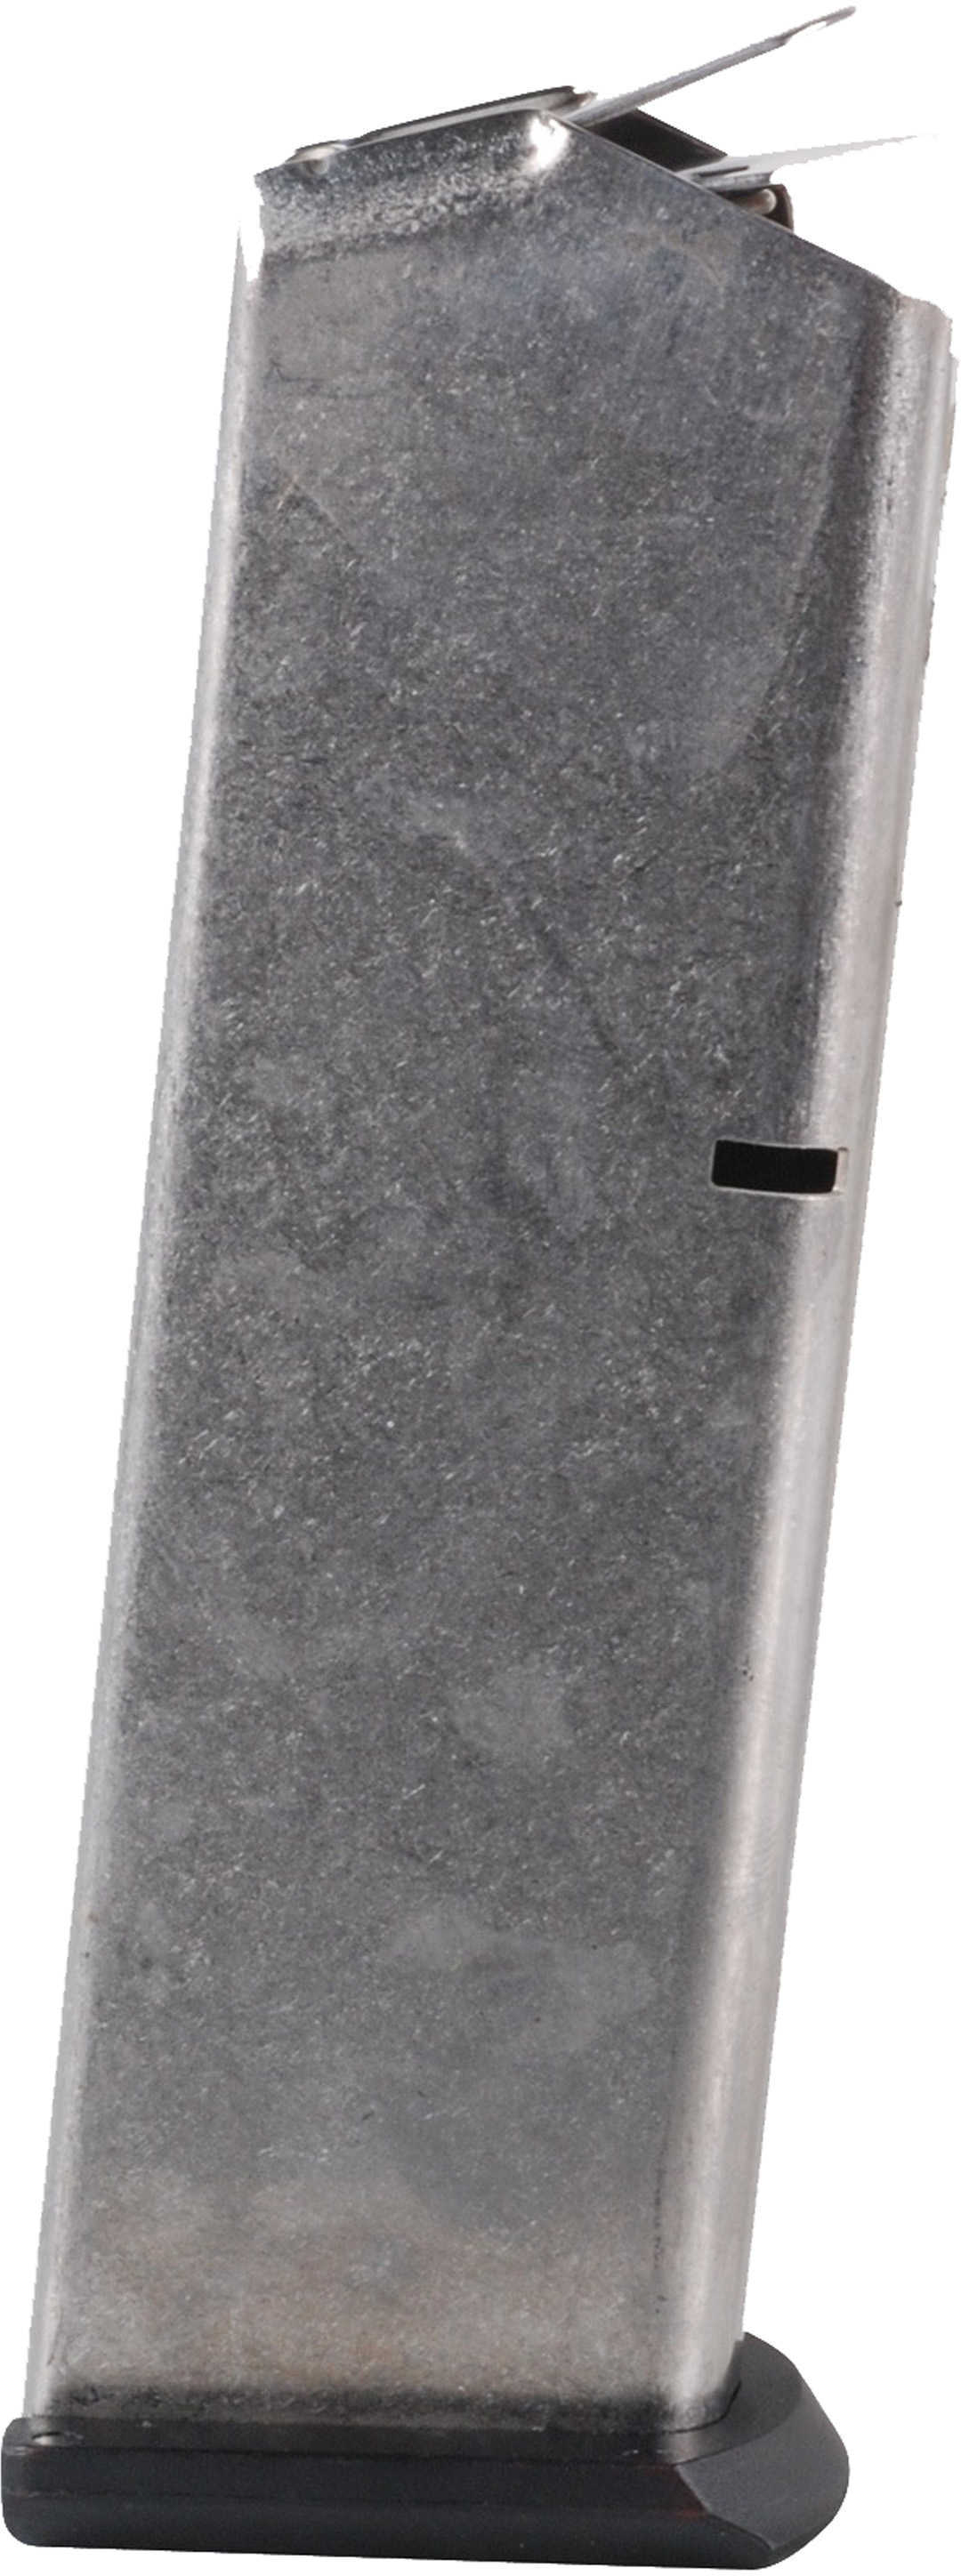 Ruger® Factory Magazine P345 .45 ACP - 8-Shot - Stainless